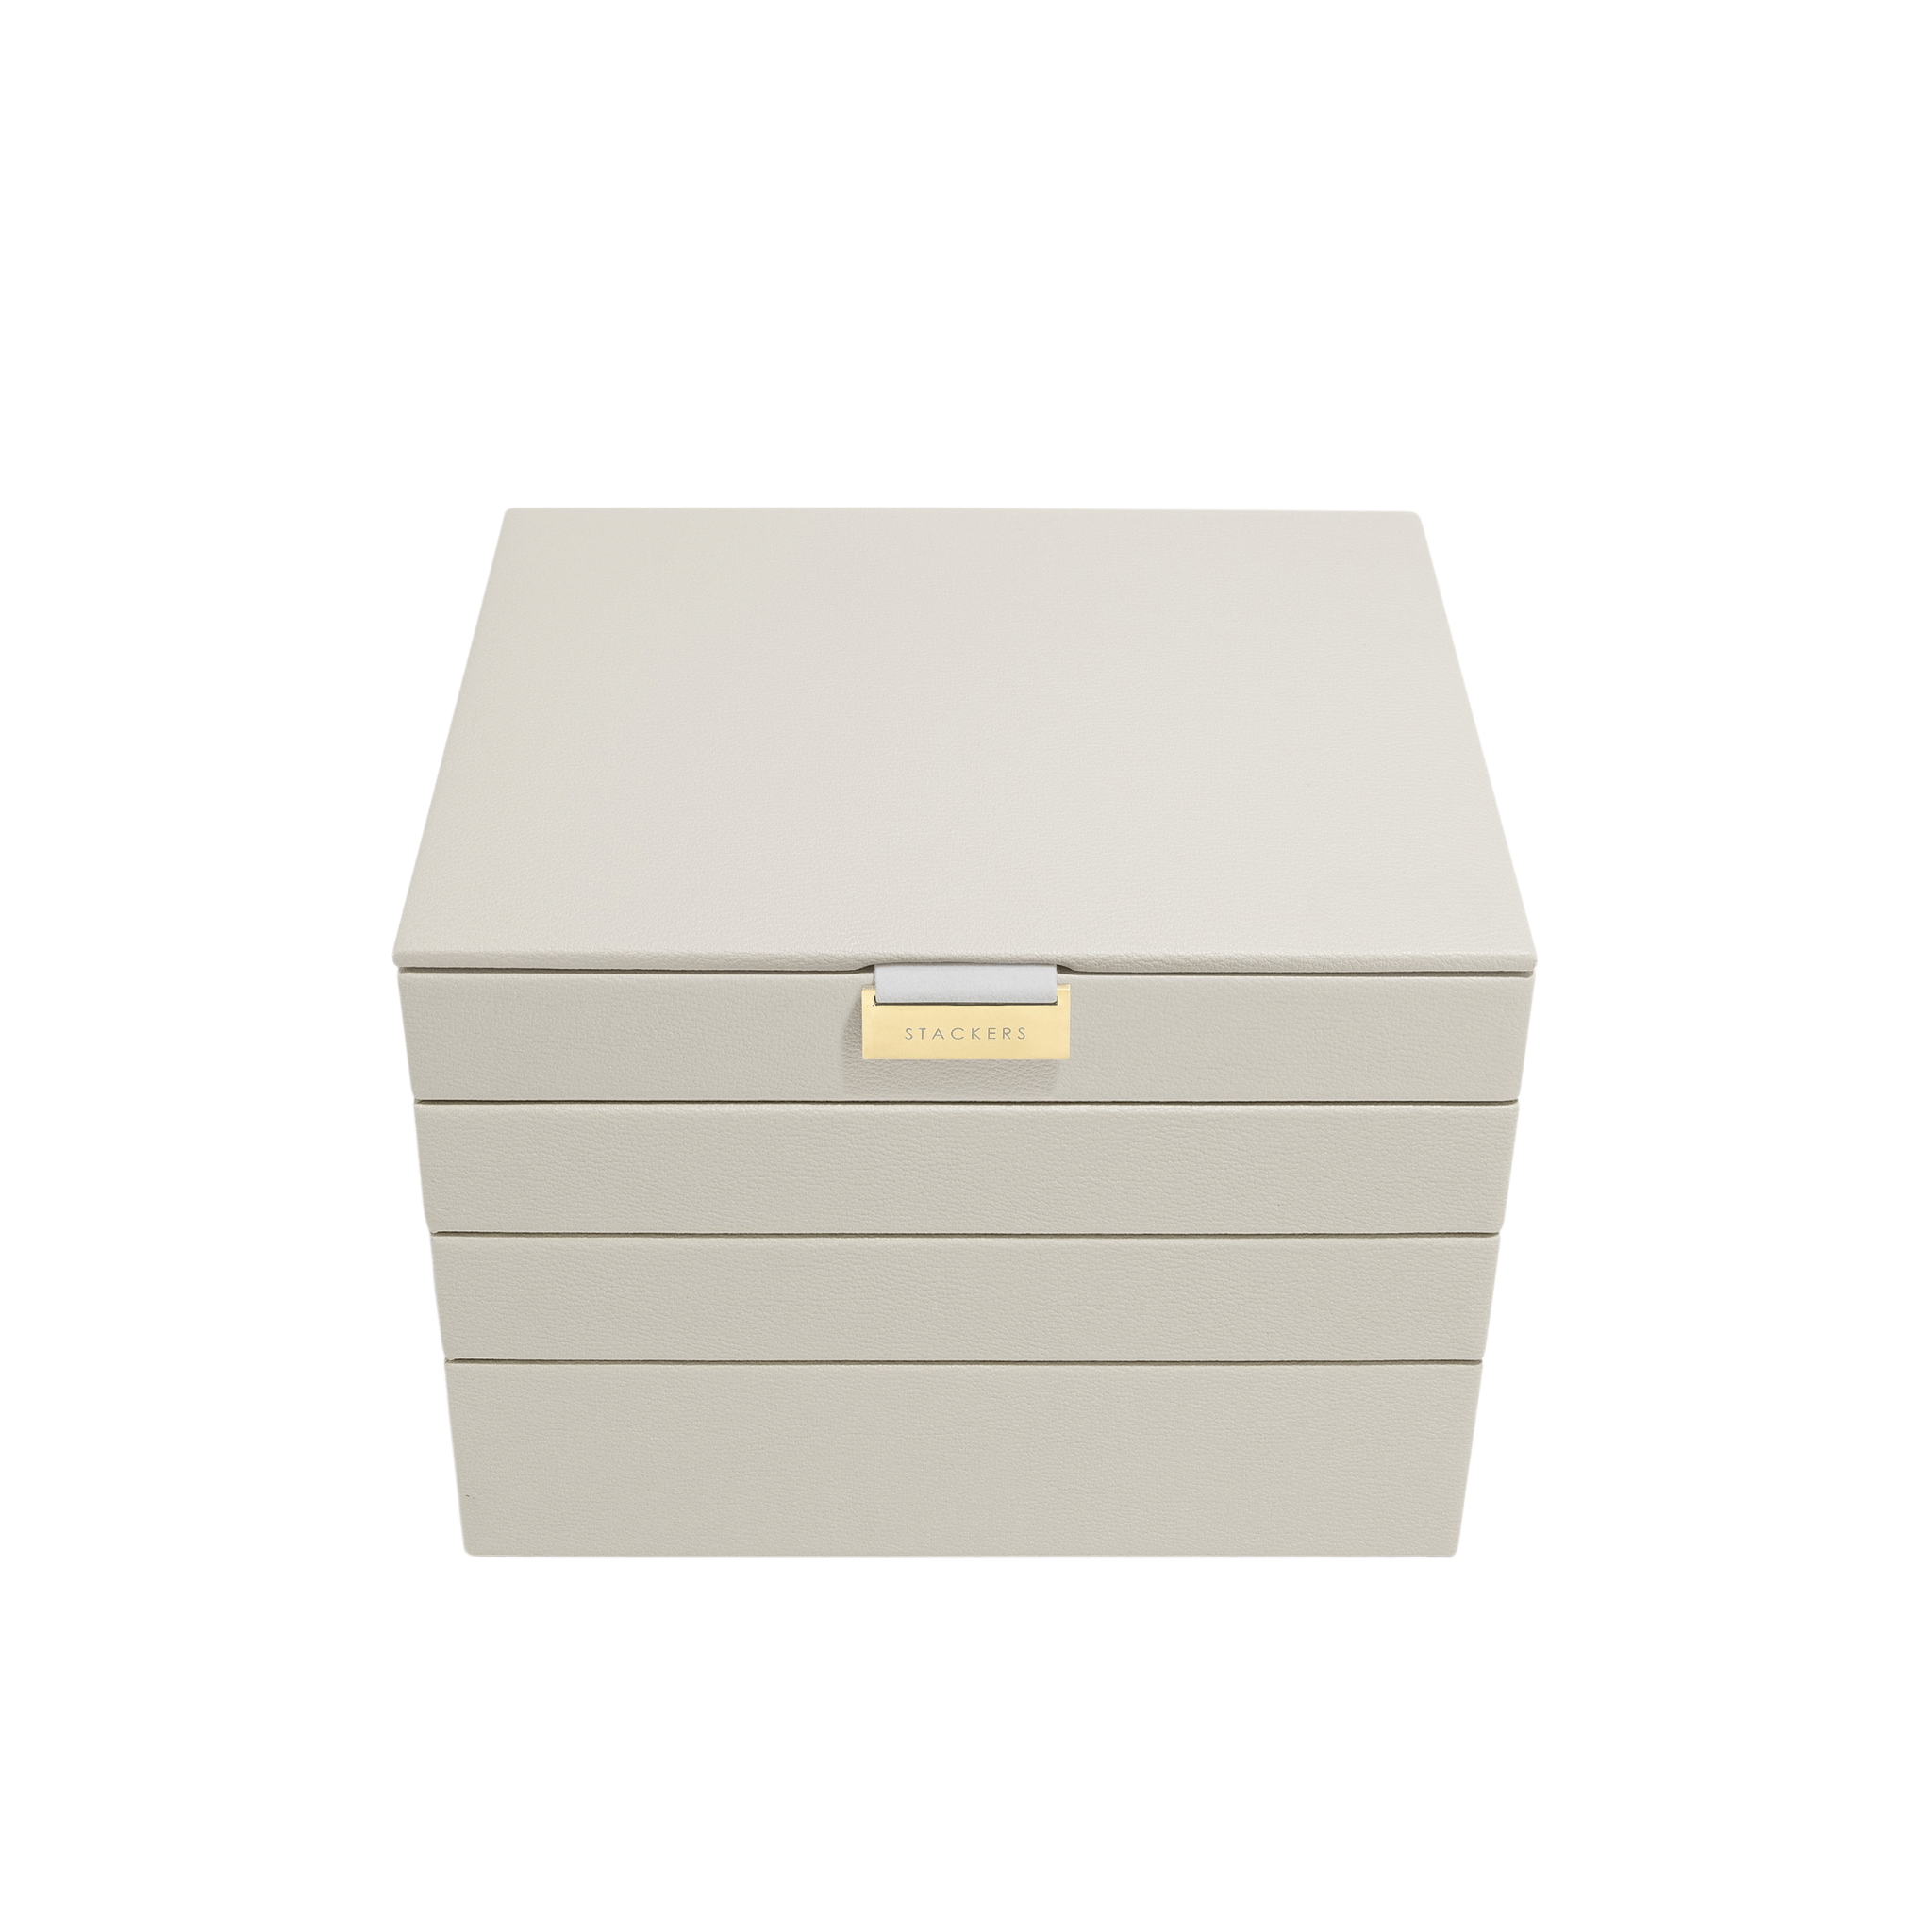 STACKERS Classic Jewelry Box 4-Set in Oatmeal